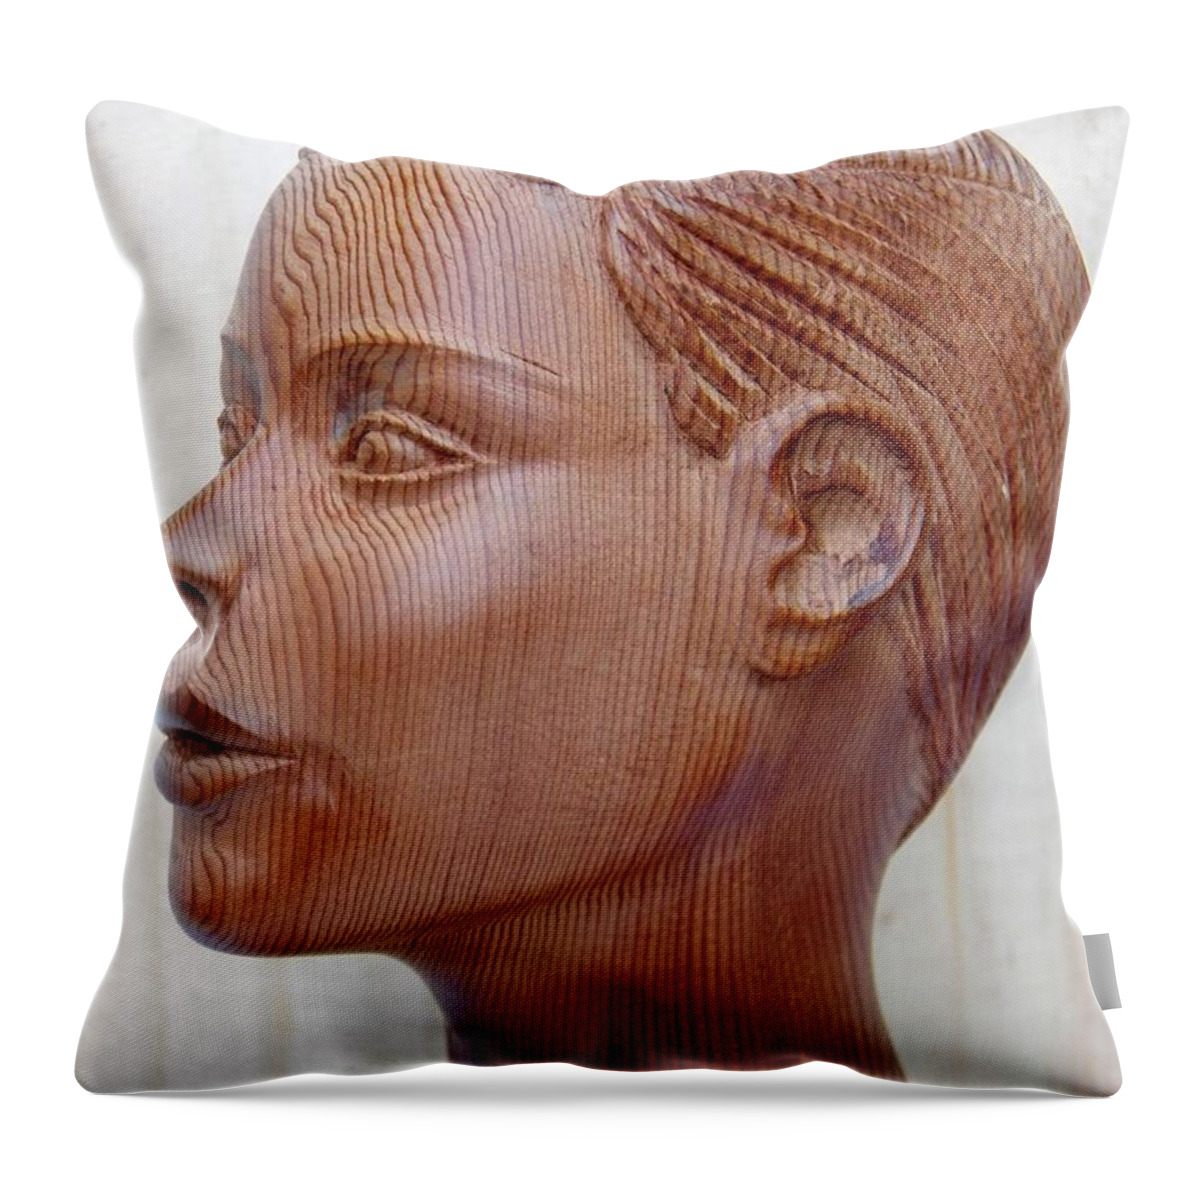 Female Head Bust Throw Pillow featuring the sculpture Female Head Bust - Side View by Ronald Osborne